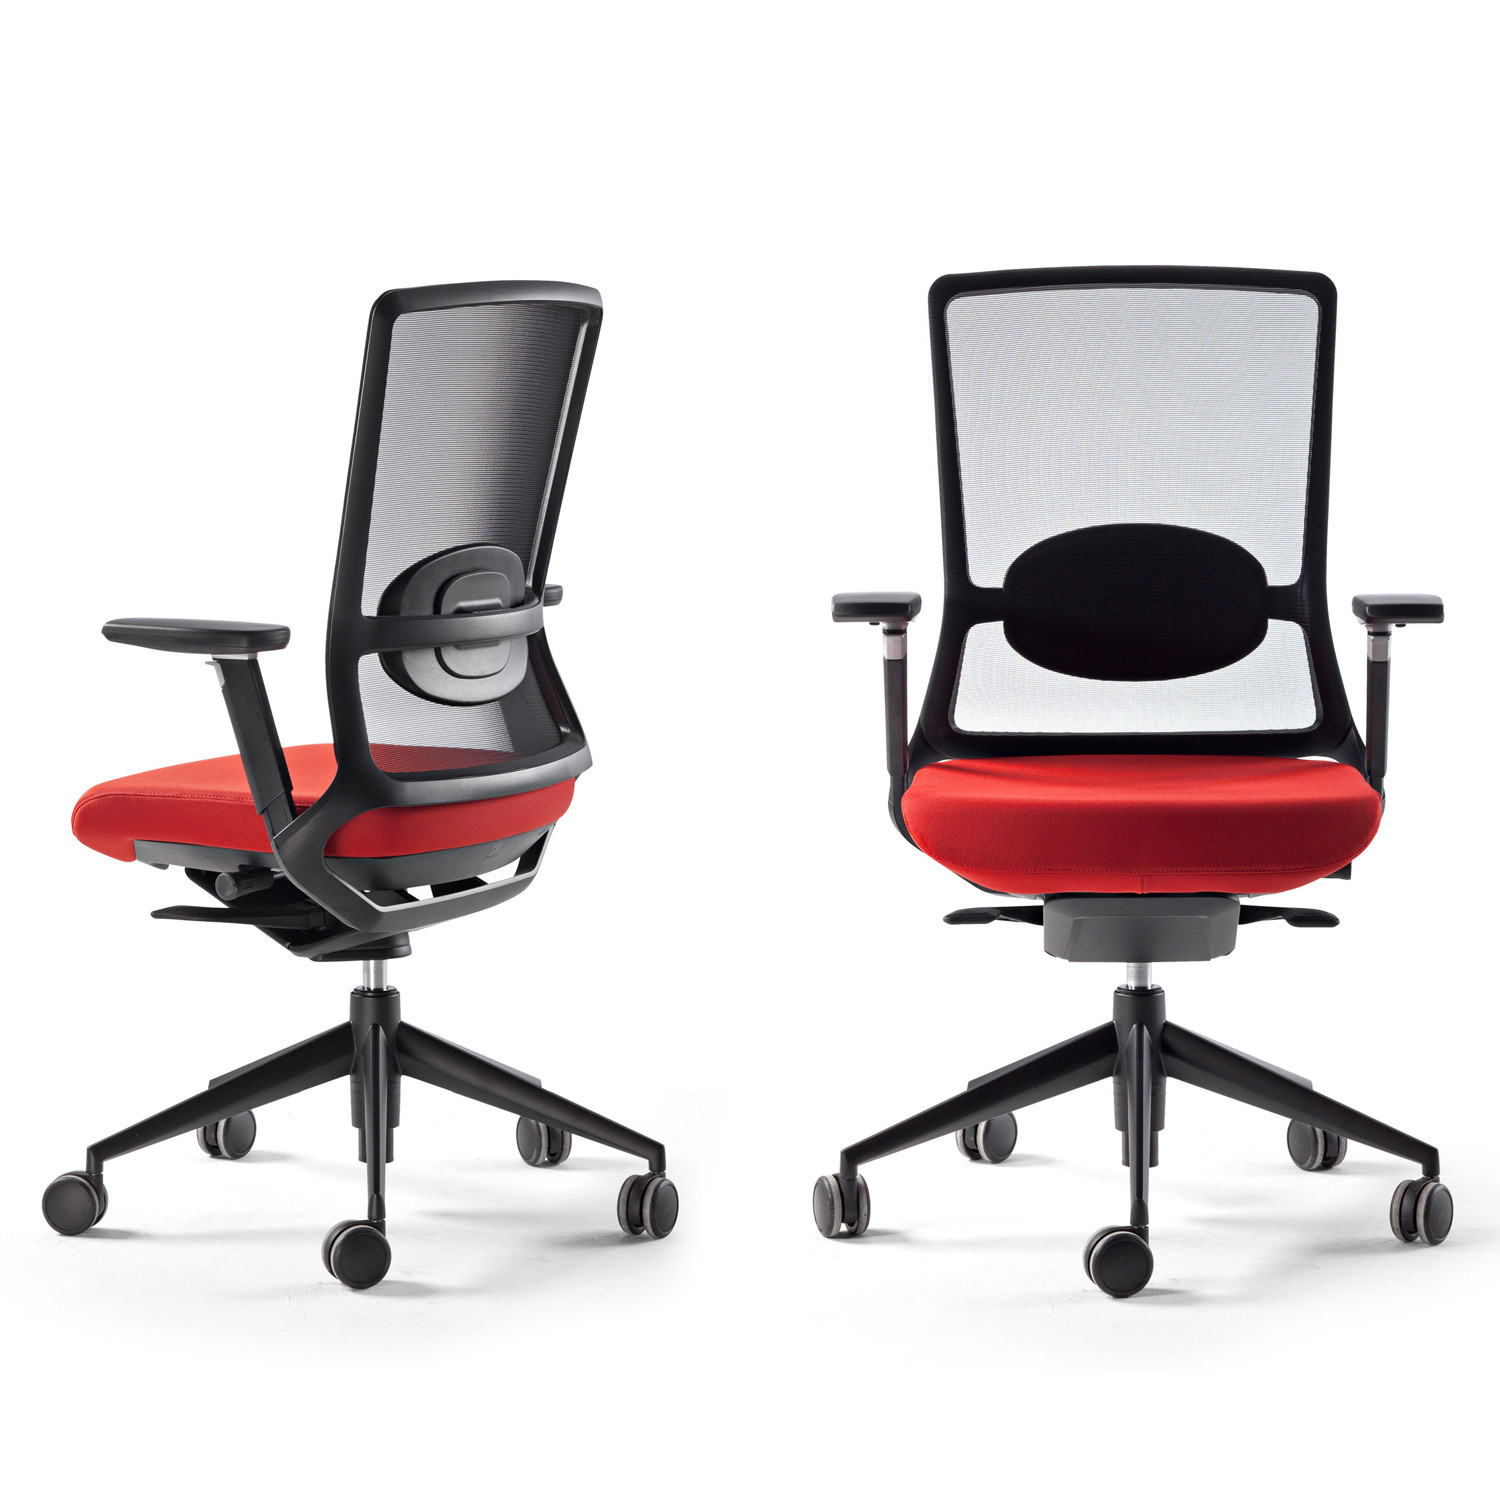 TNK 500 Office Chairs